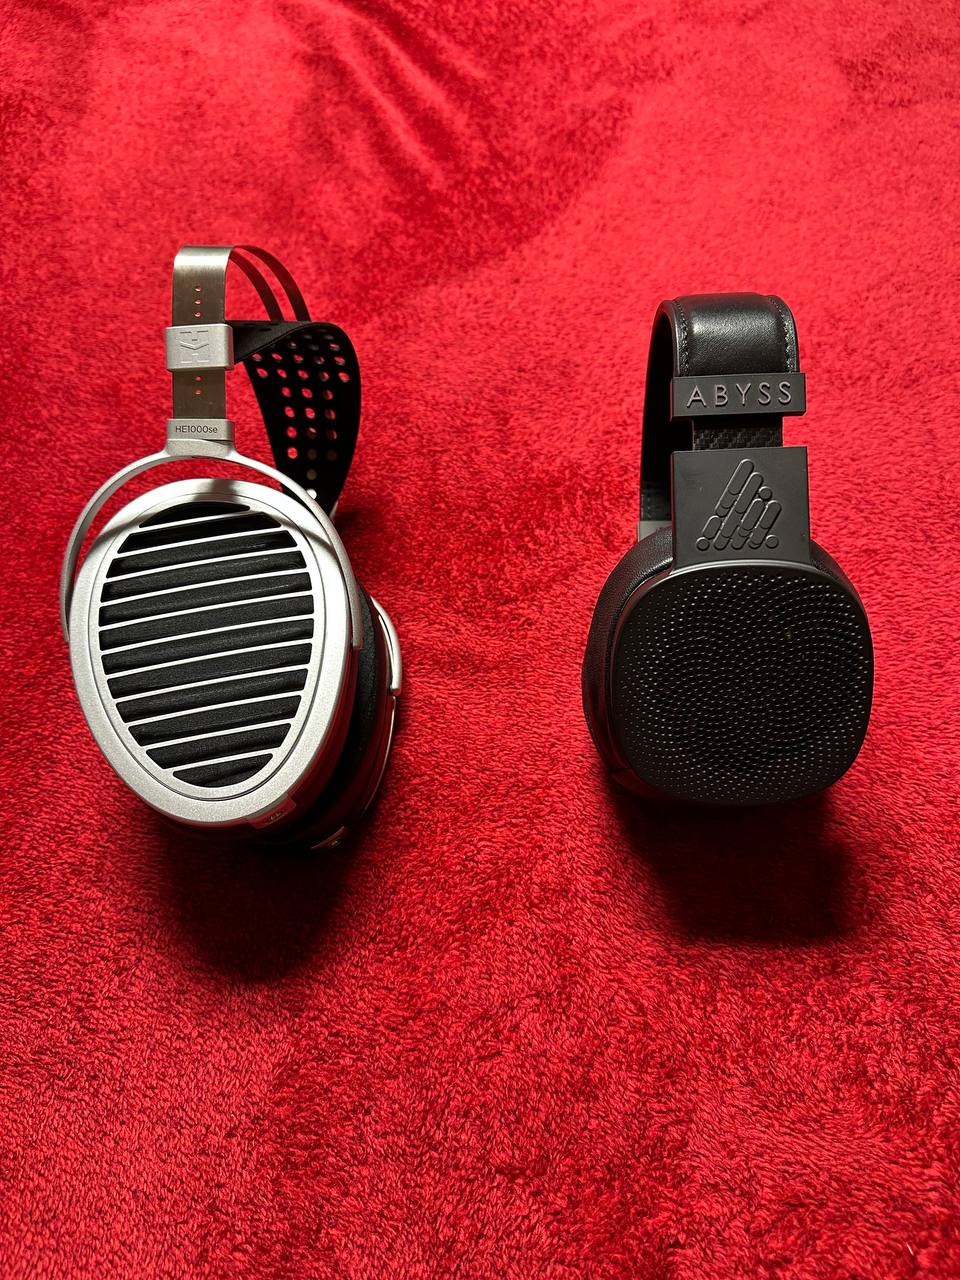 Hifiman HE1000SE vs Abyss Diana V2 by Euphoric Audio